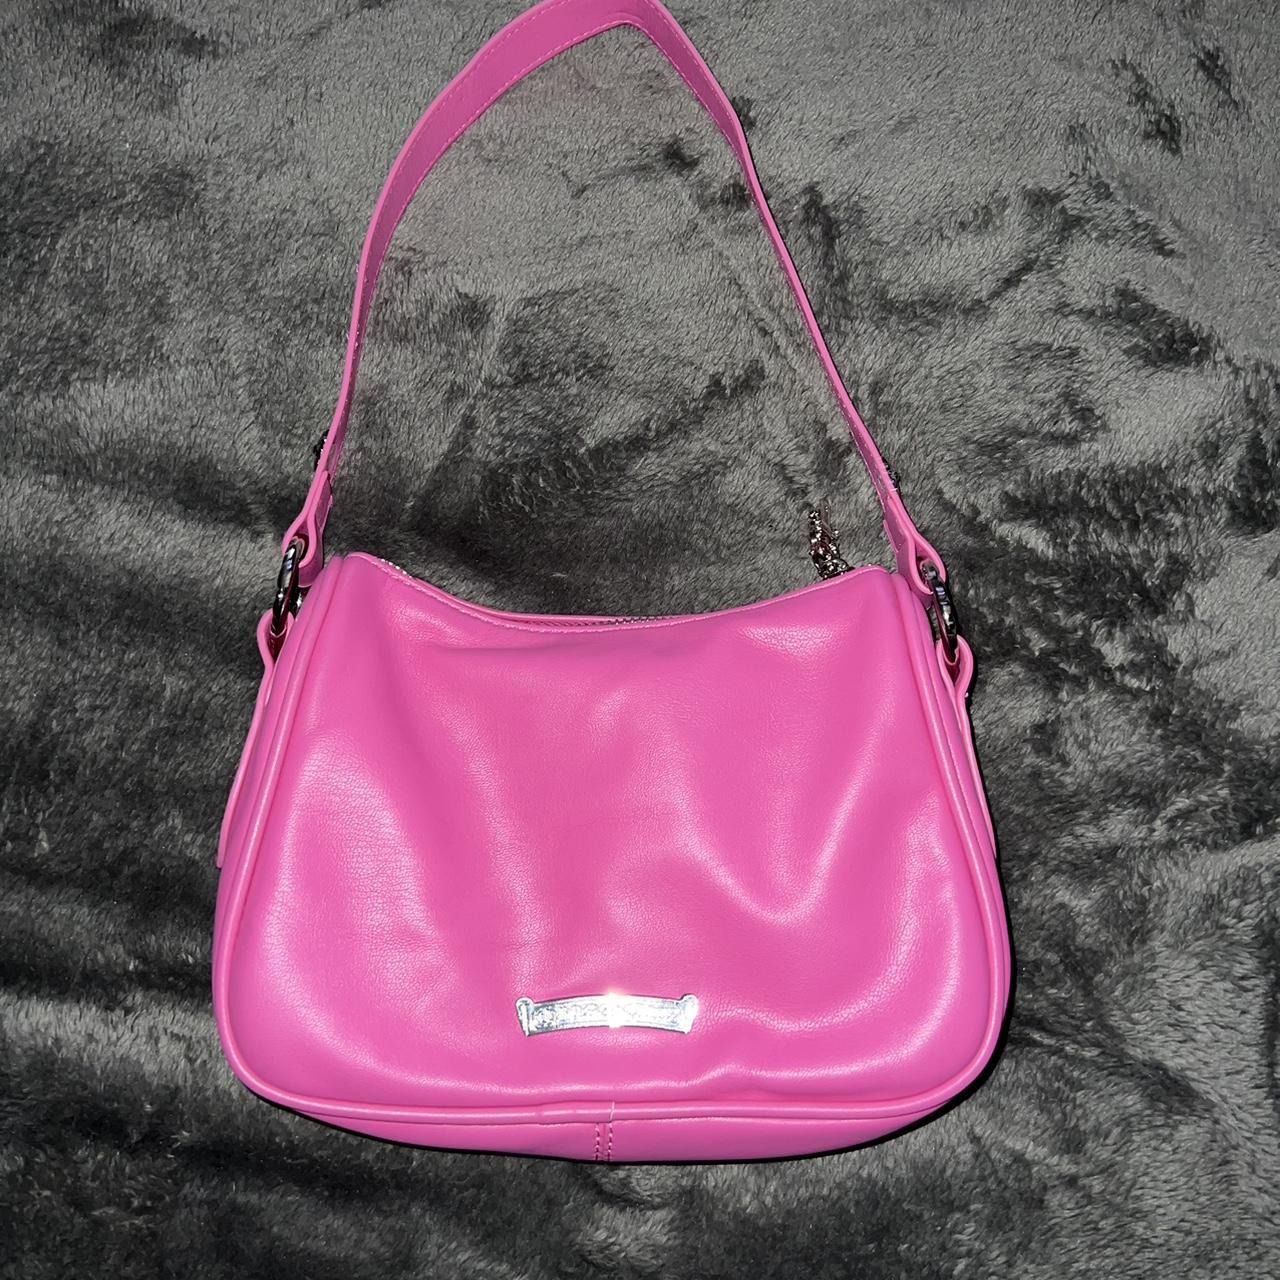 Women's Pink and Silver Bag (2)